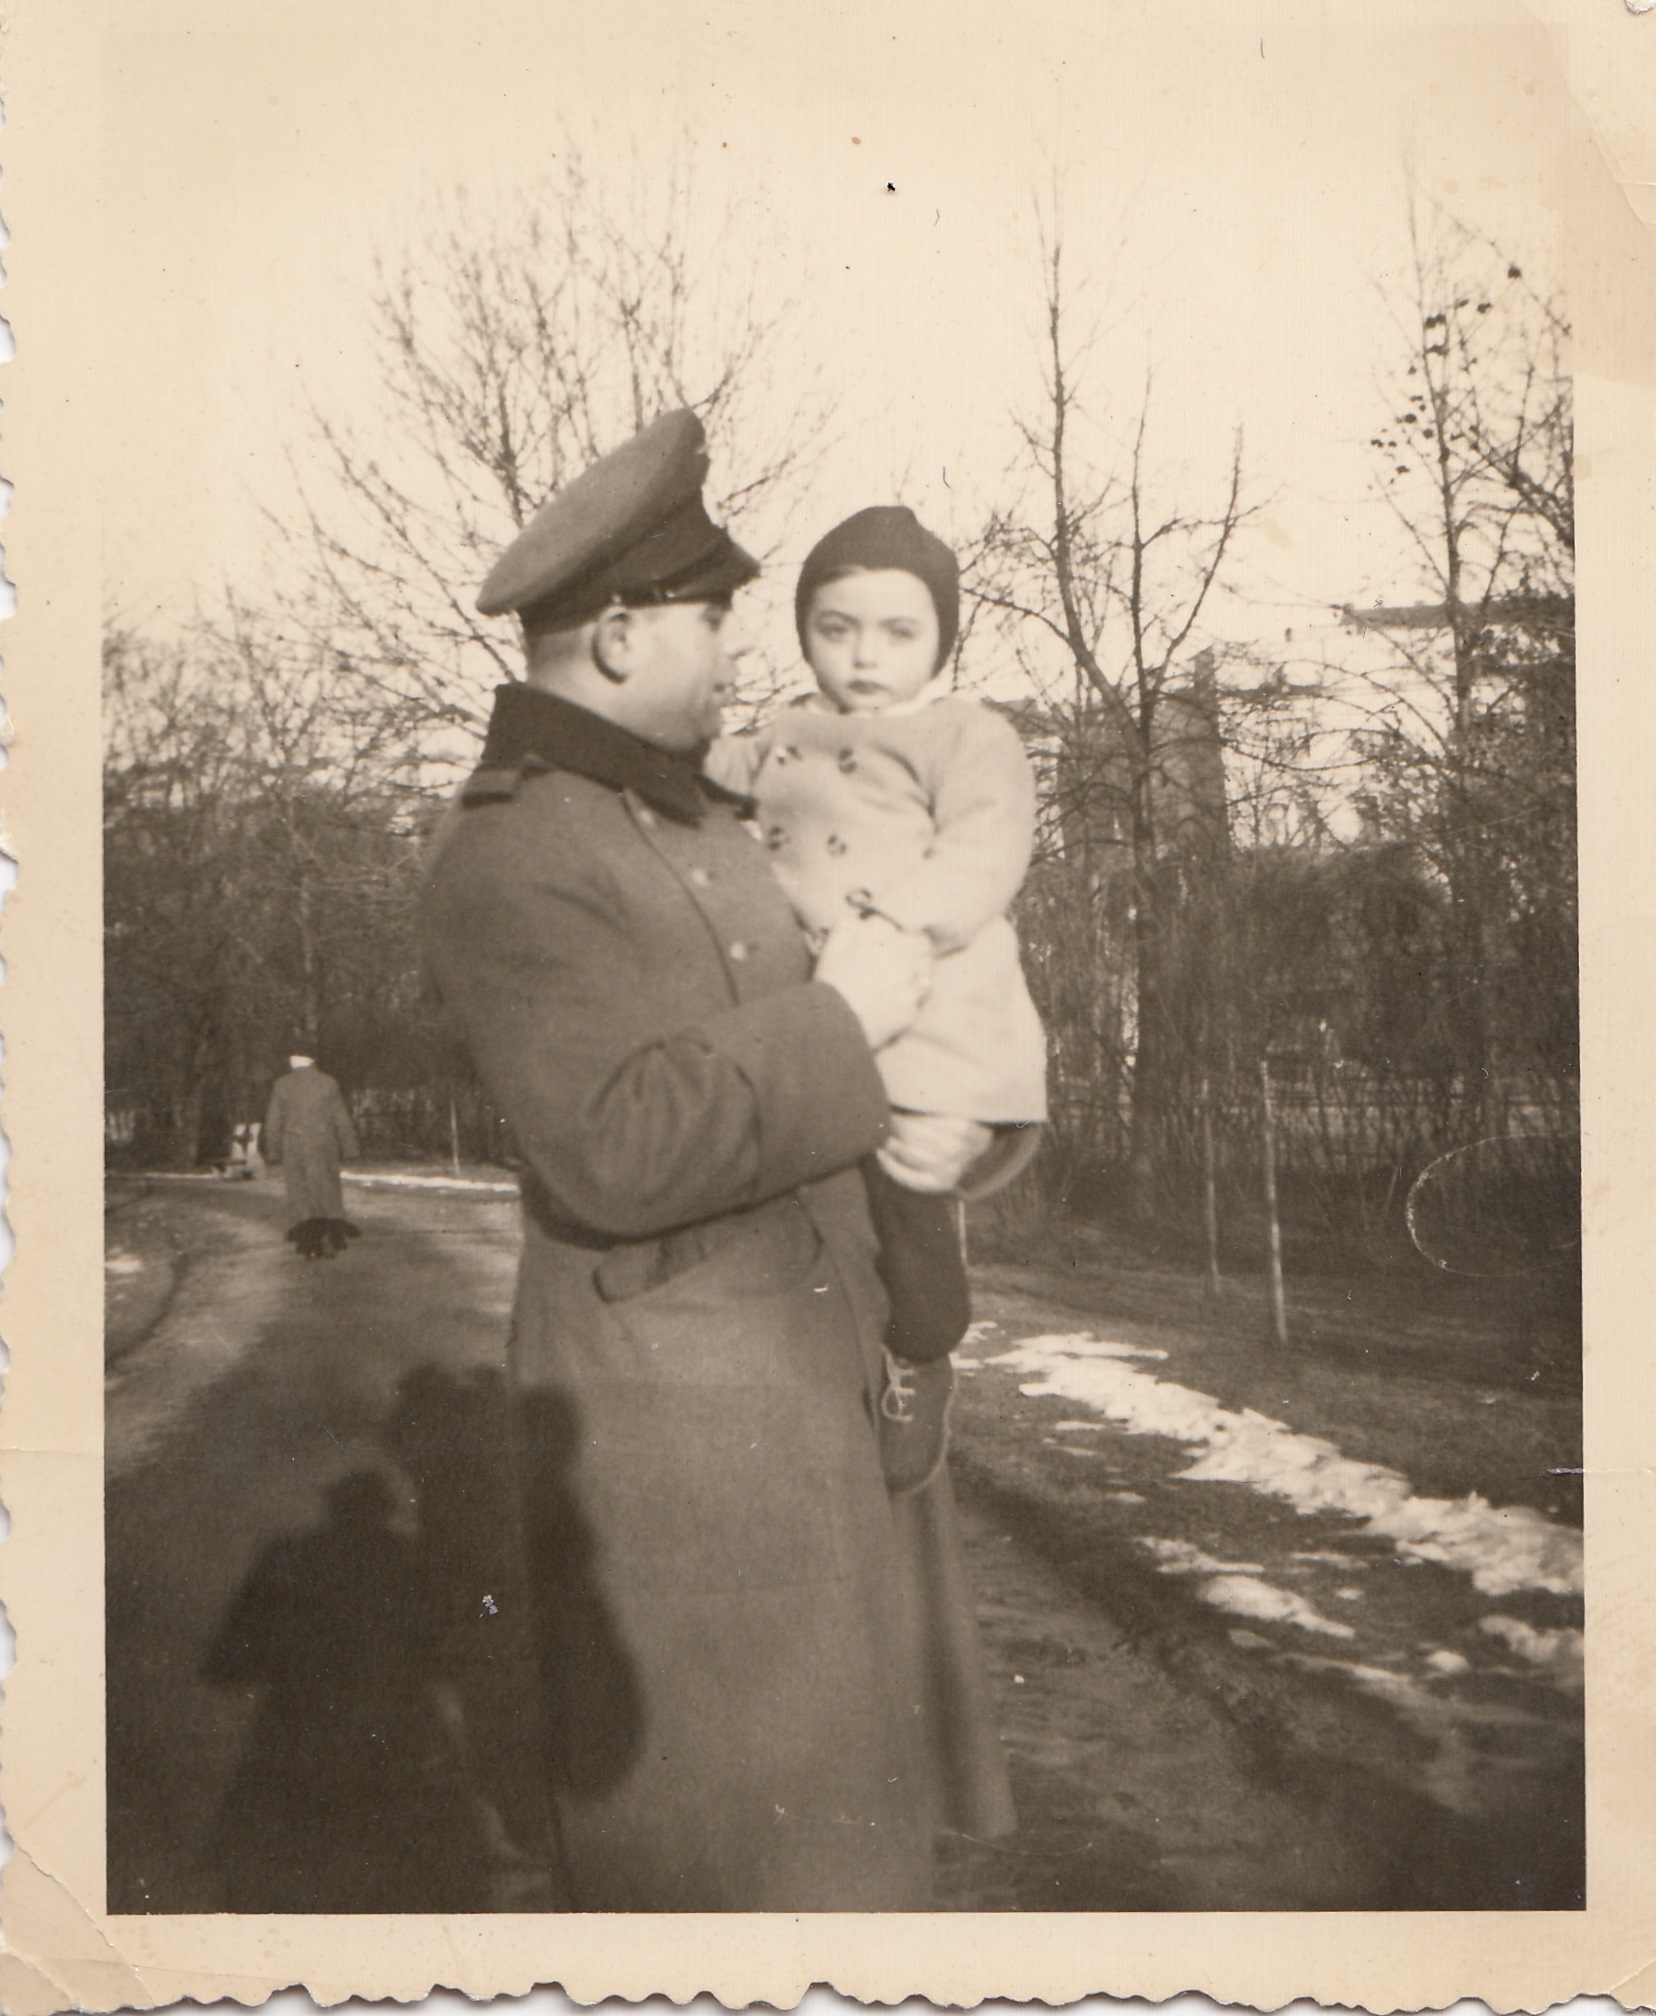 The witness's father on leave during the war, from the year 1943. Little Karel Walter can be seen on the photograph with his father 